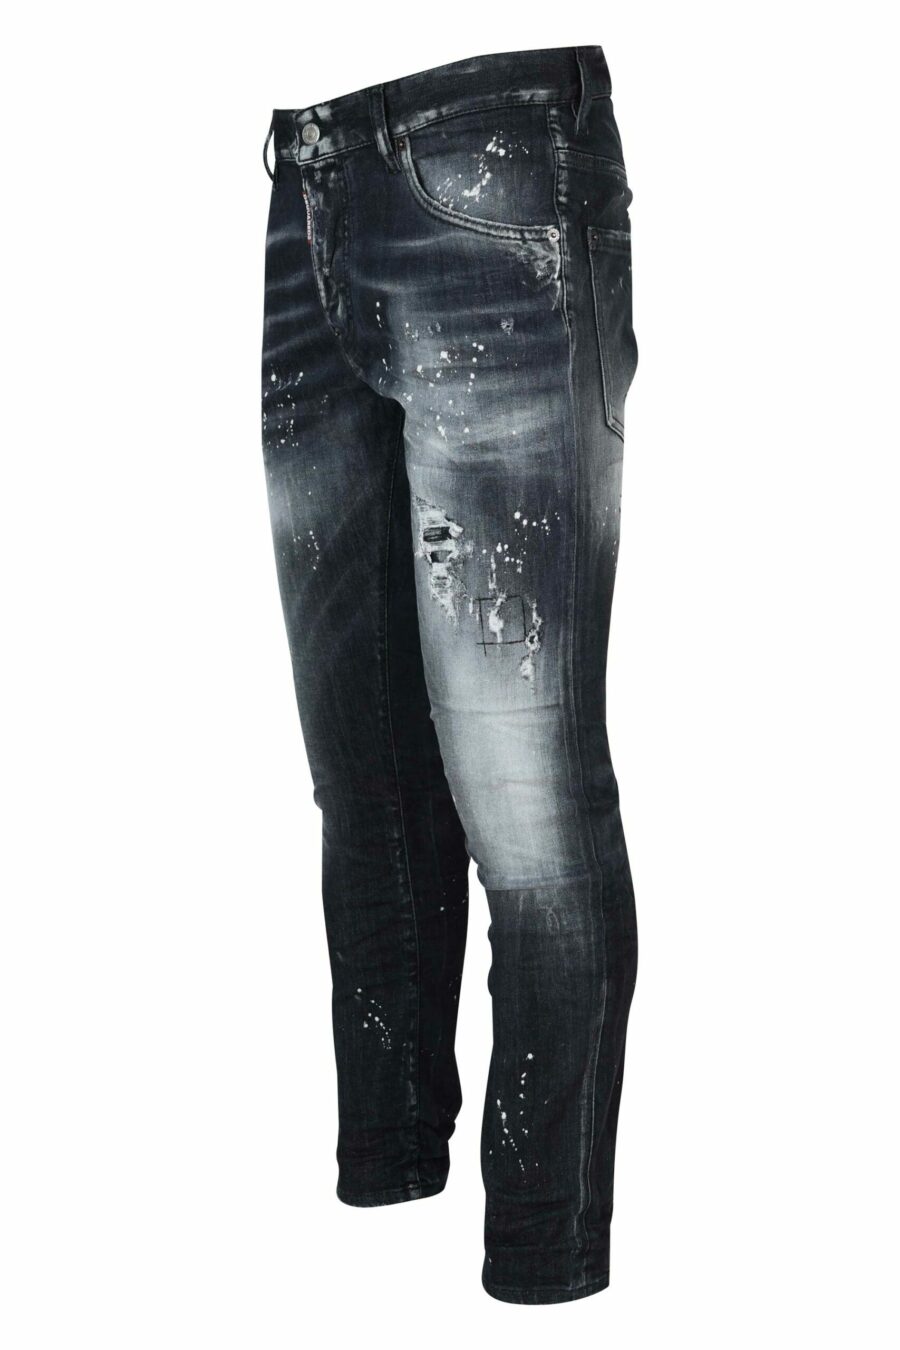 Black "skater jean" jeans with ripped and torn - 8054148474126 1 scaled